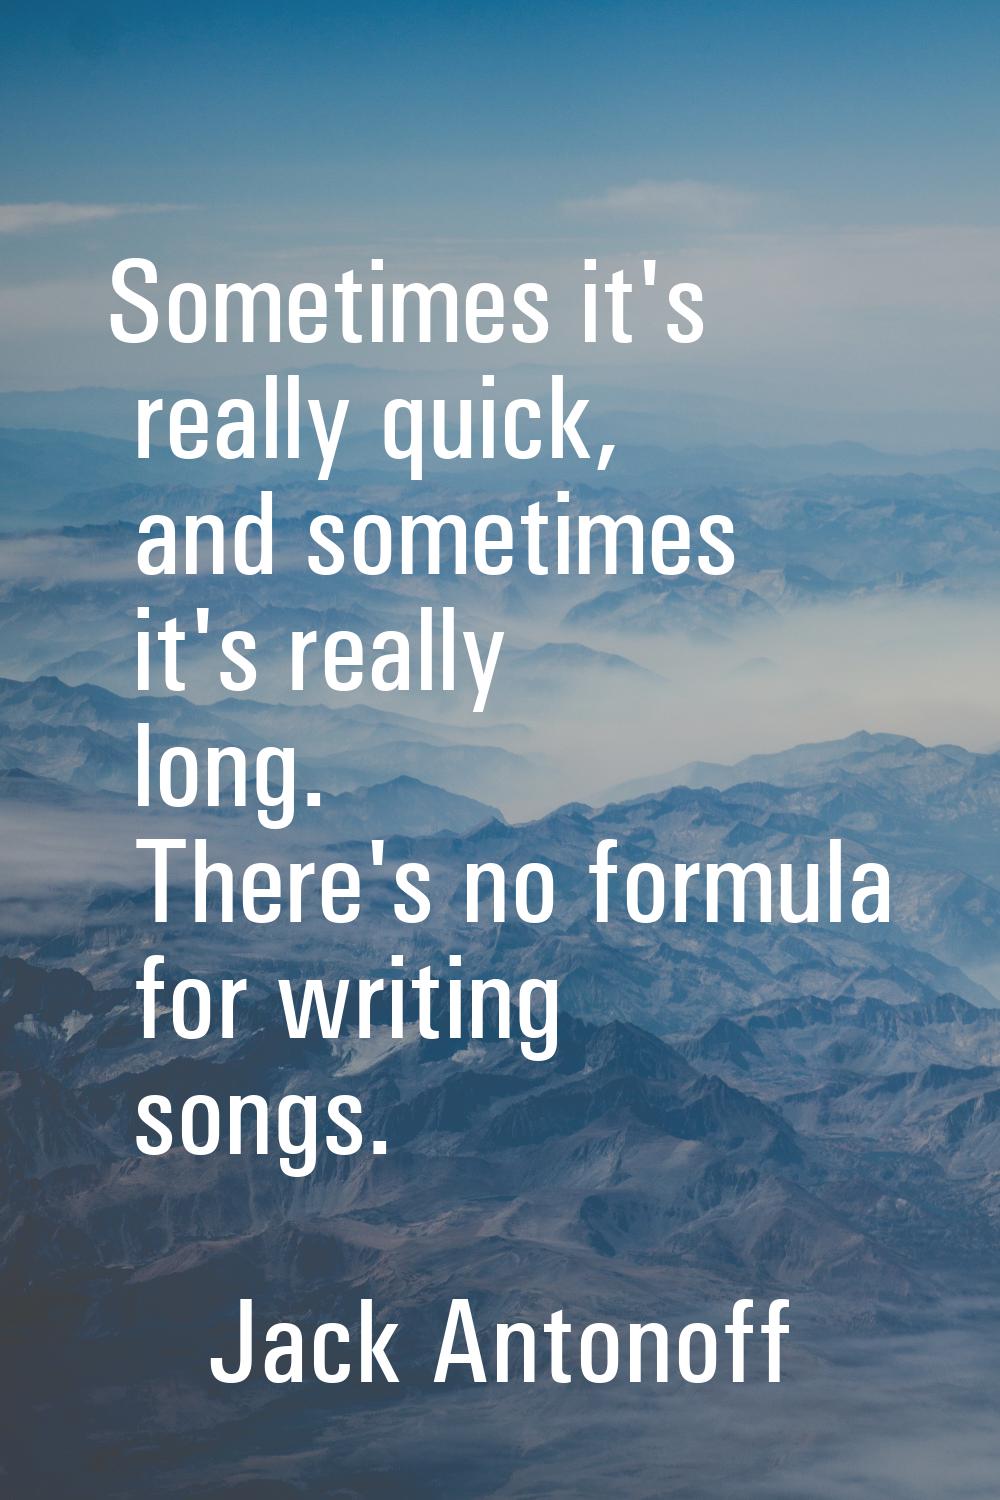 Sometimes it's really quick, and sometimes it's really long. There's no formula for writing songs.